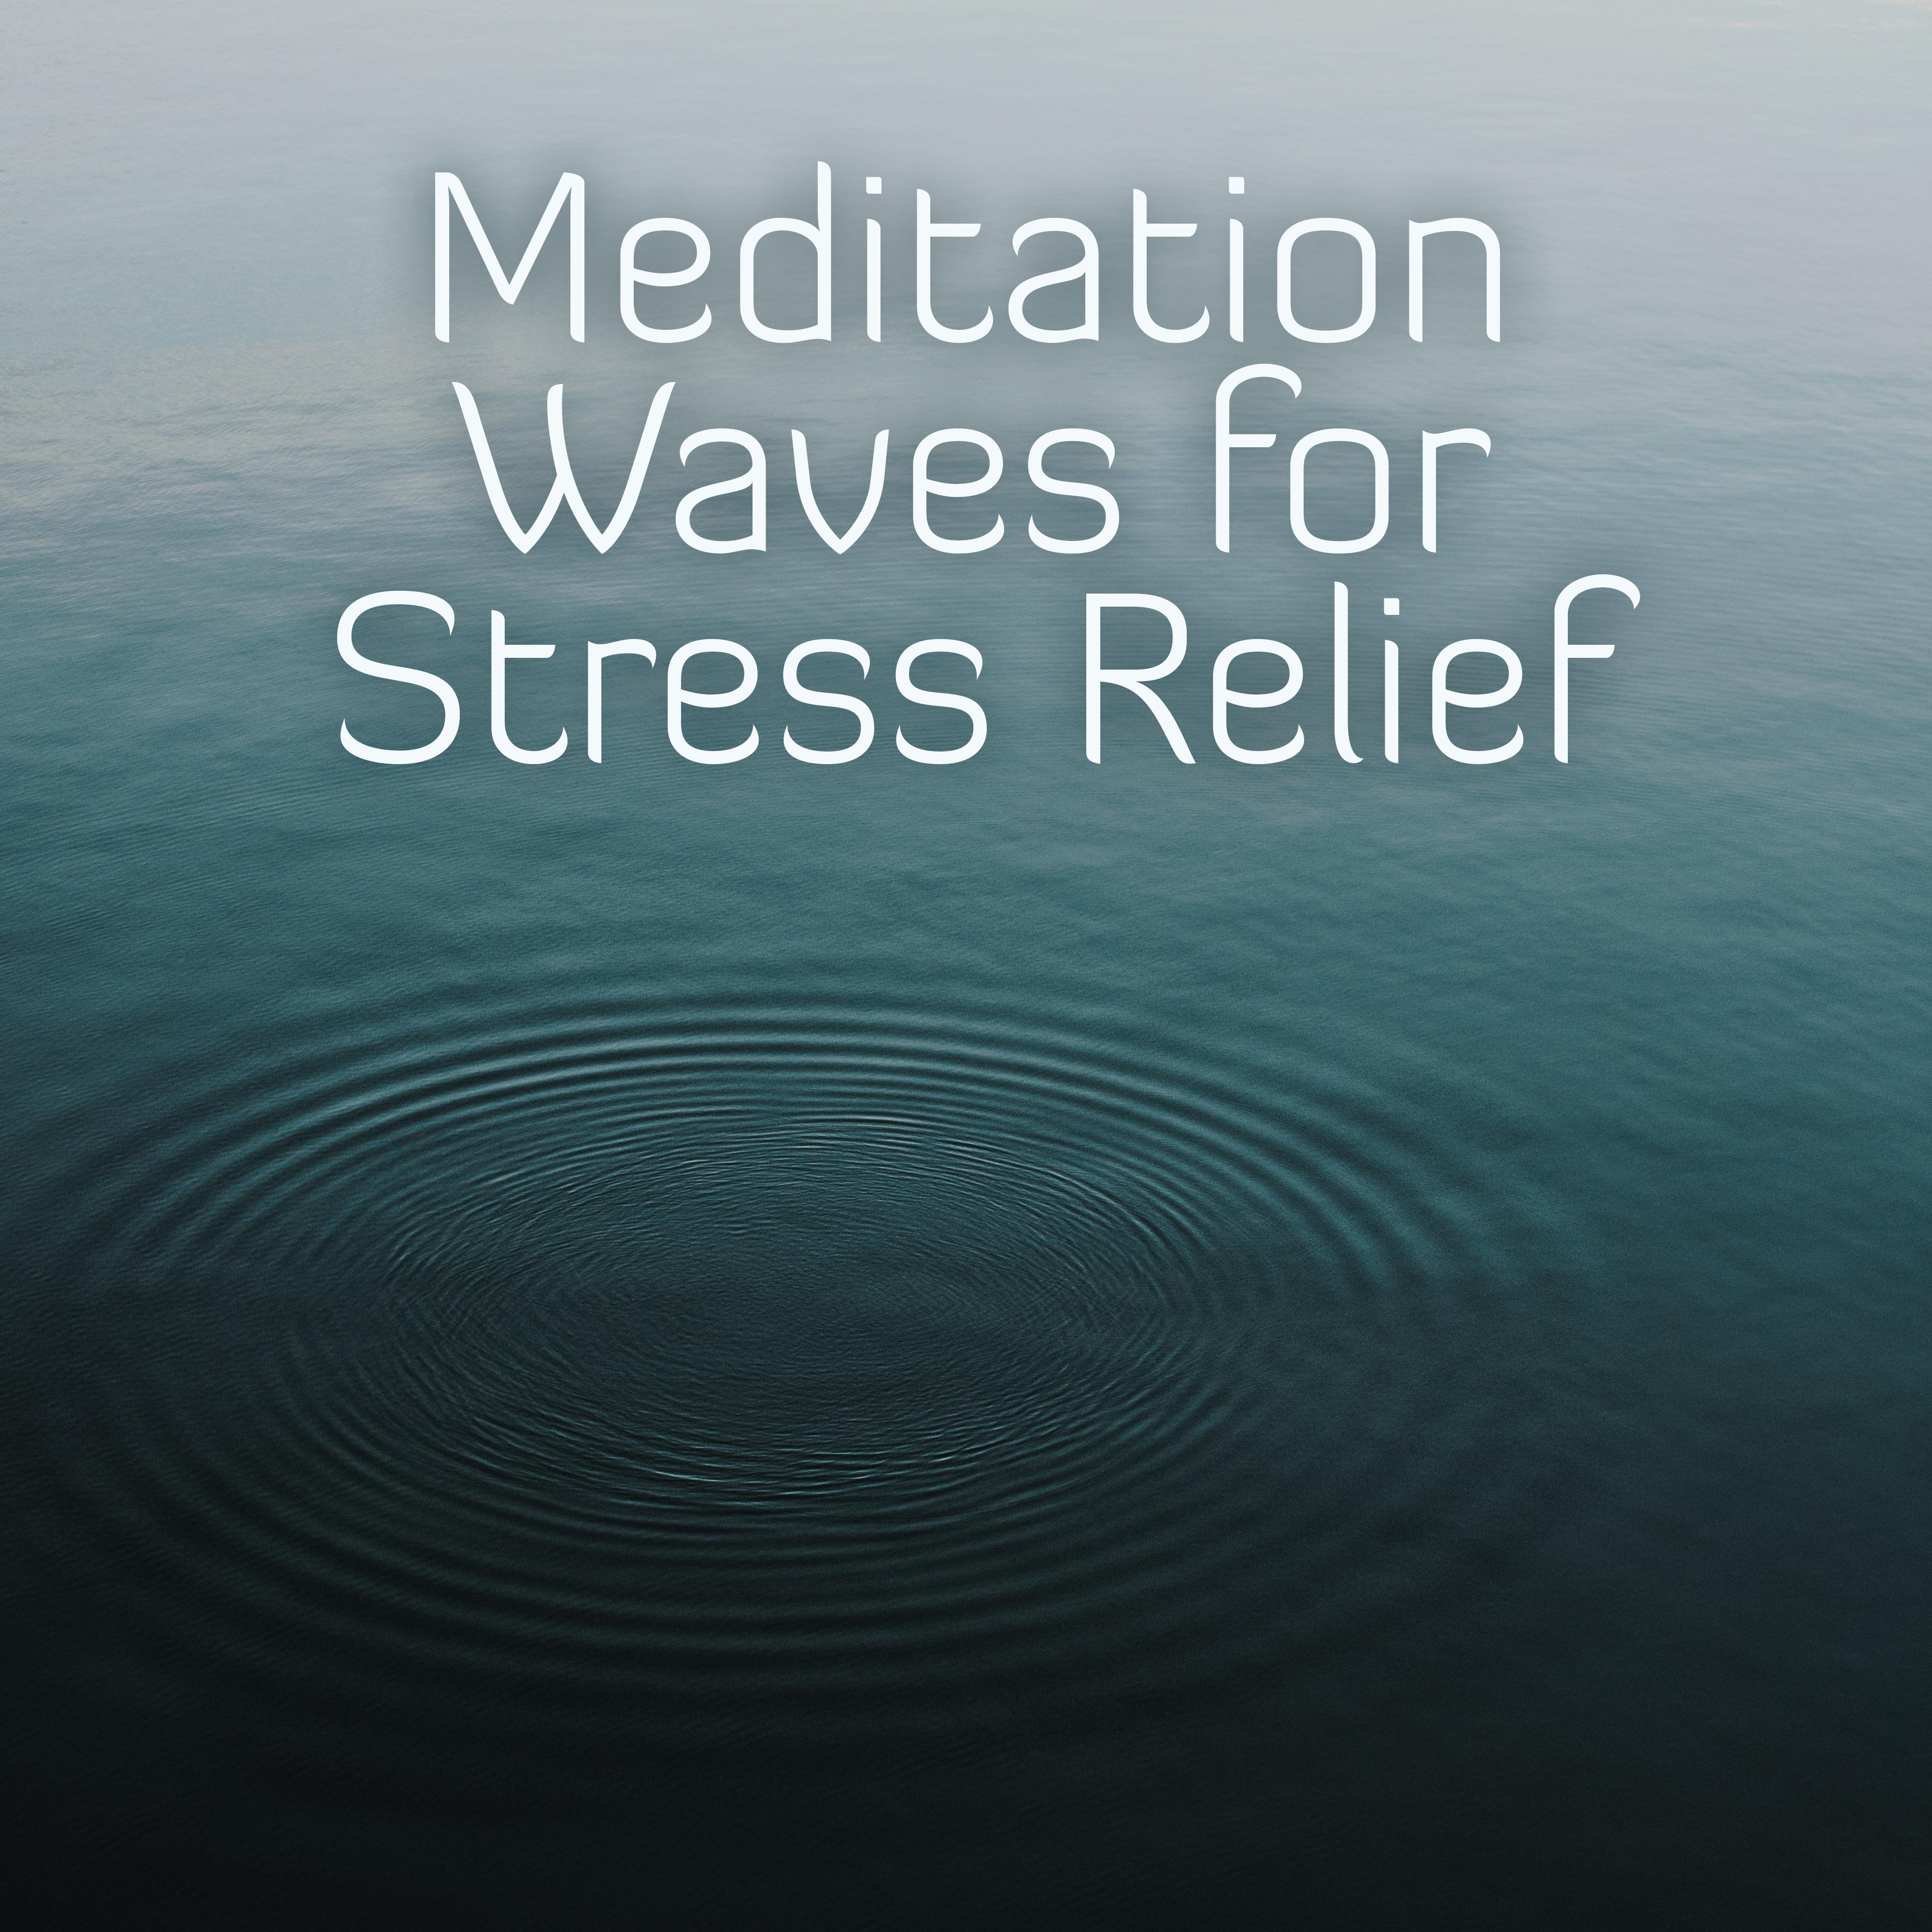 Meditation Waves for Stress Relief